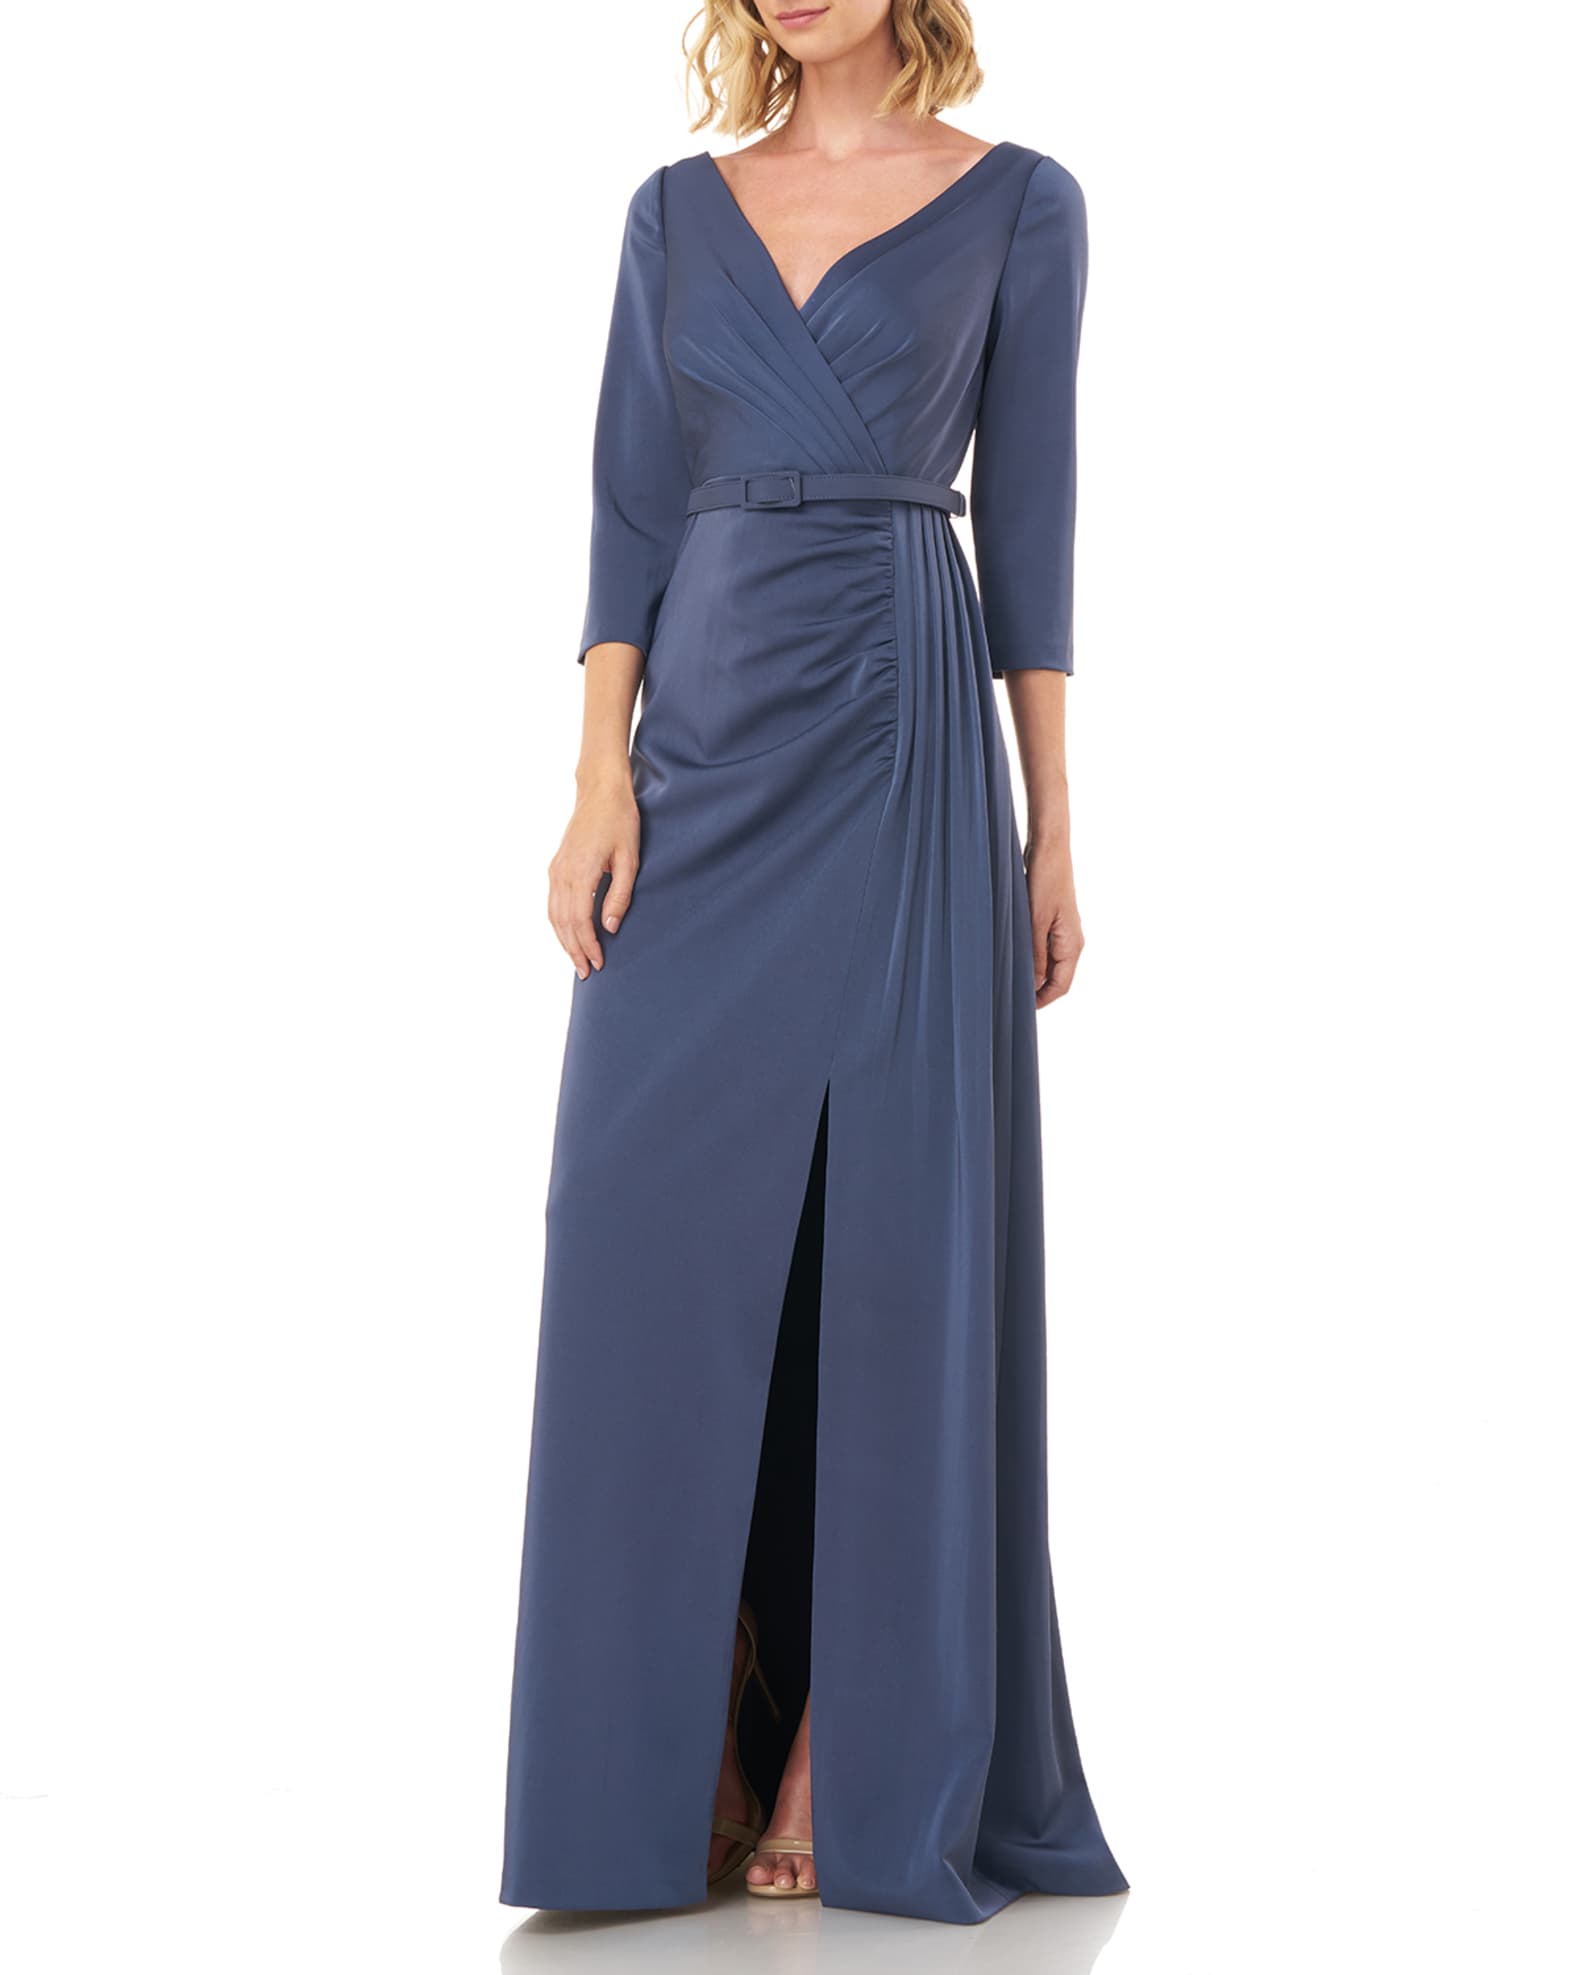 Kay Unger New York Capri V-Neck 3/4-Sleeve Belted Stretch Faille Gown ...